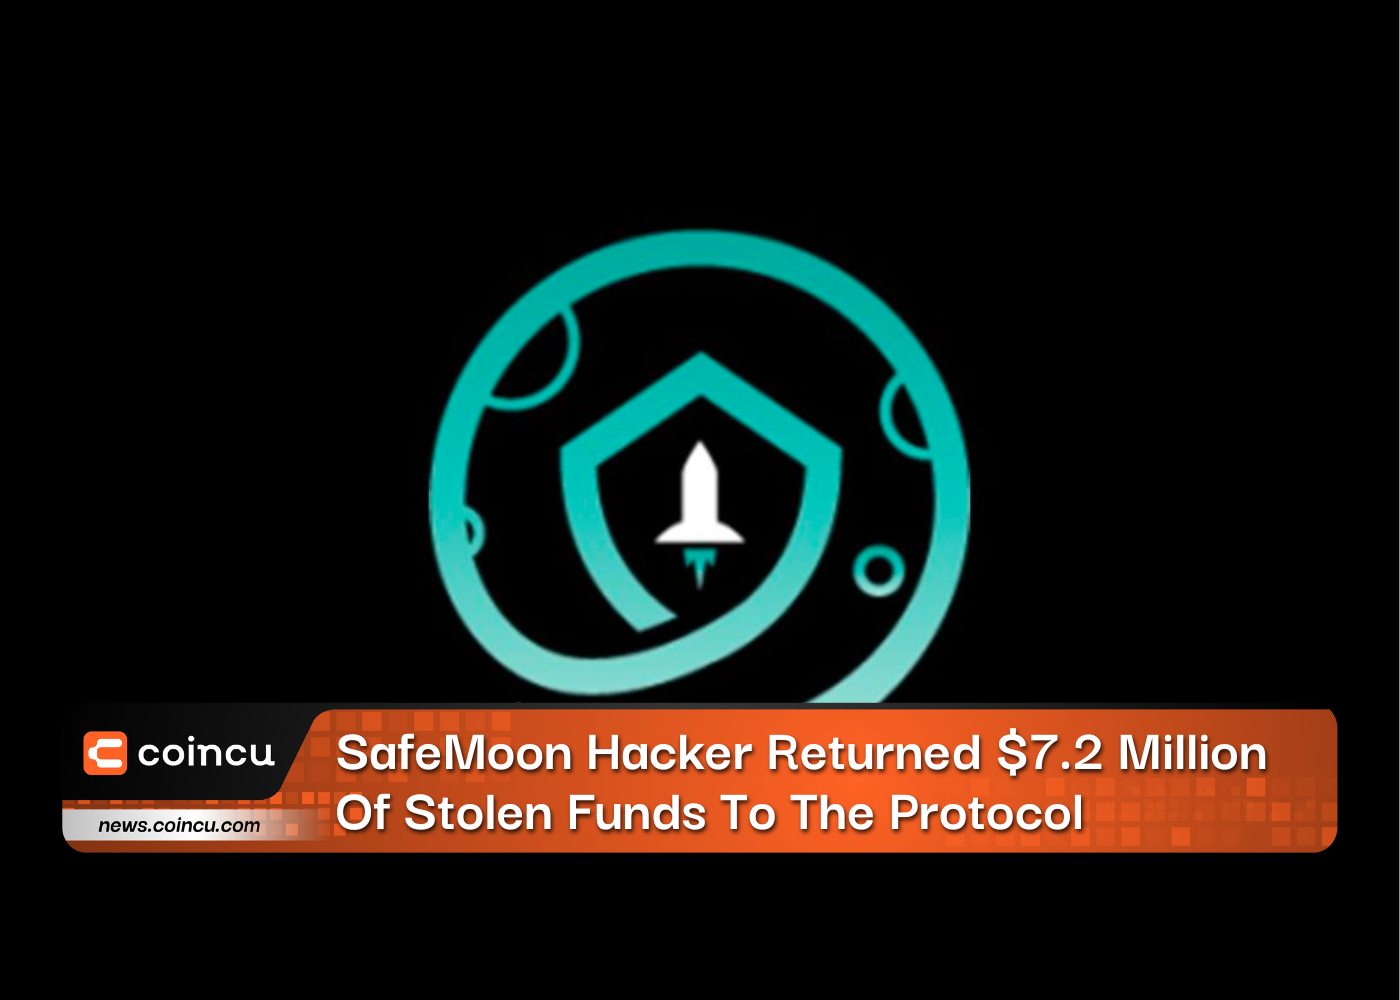 SafeMoon Hacker Returned $7.2 Million Of Stolen Funds To The Protocol